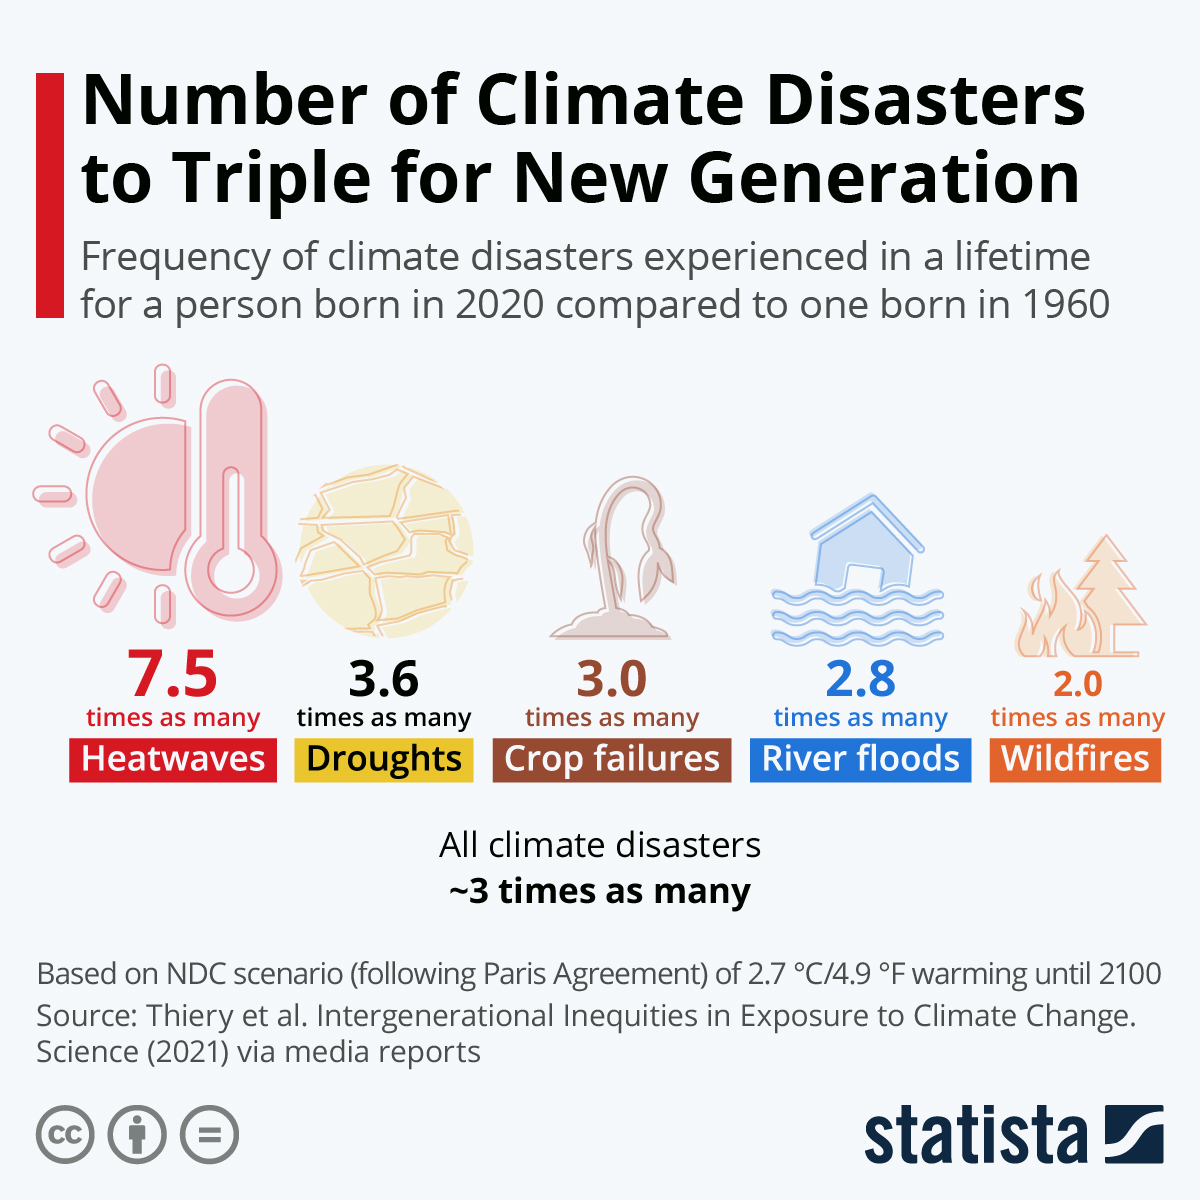 Number of Climate Disasters to Triple for New Generation
